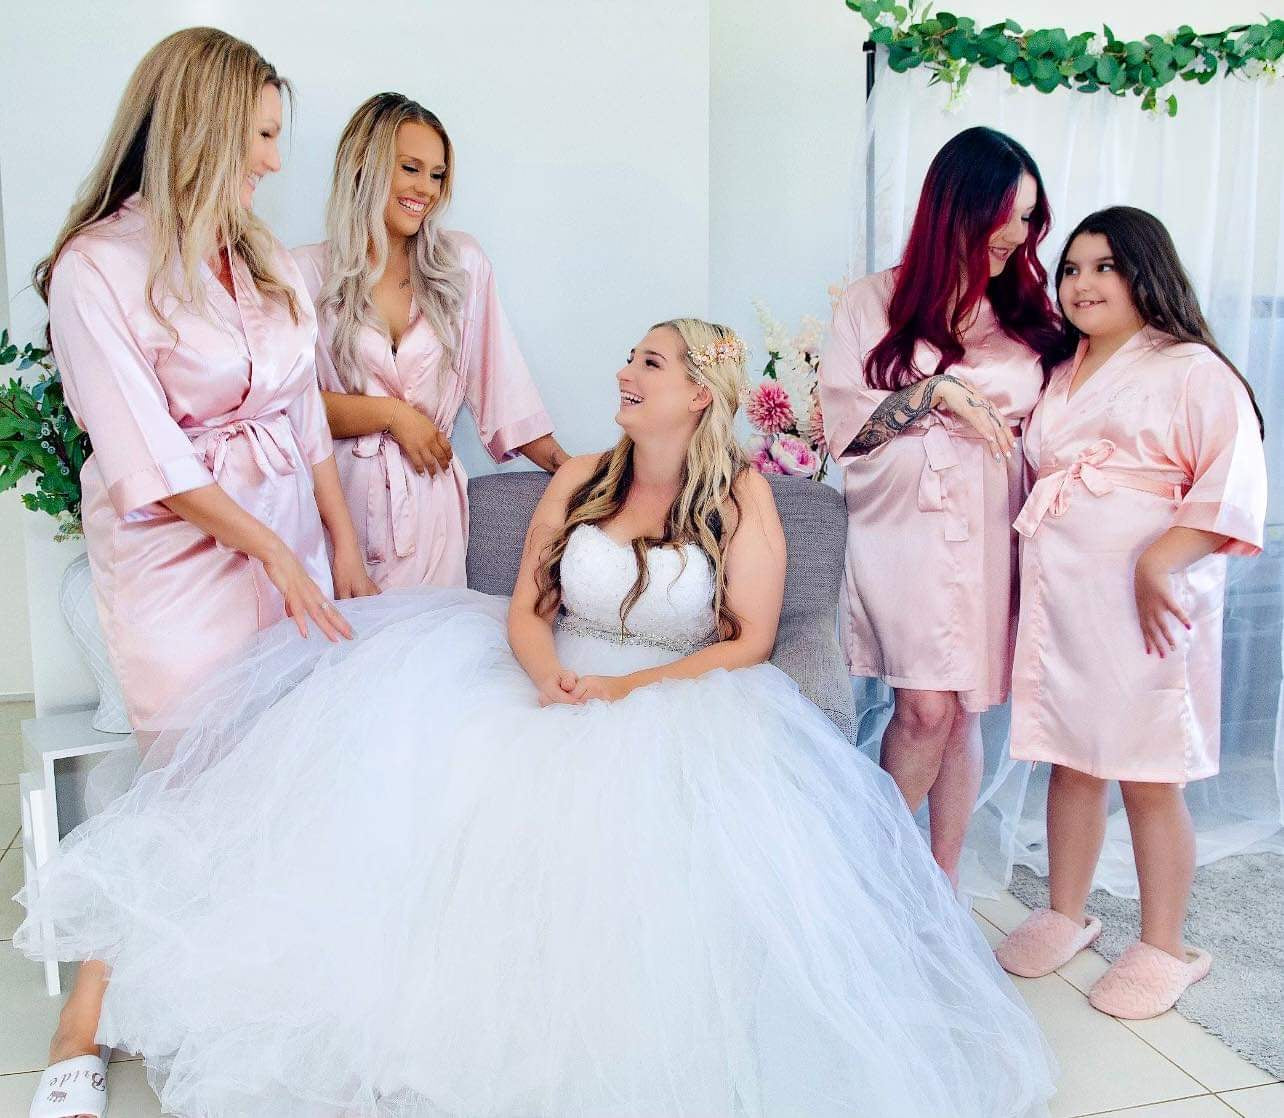 Bridal Party picture with the Bride to Be seated, she is smiling at her 3 Bridesmaids and Flowergirl who are wearing Luxurious Satin Robes in a Rose Gold Colour